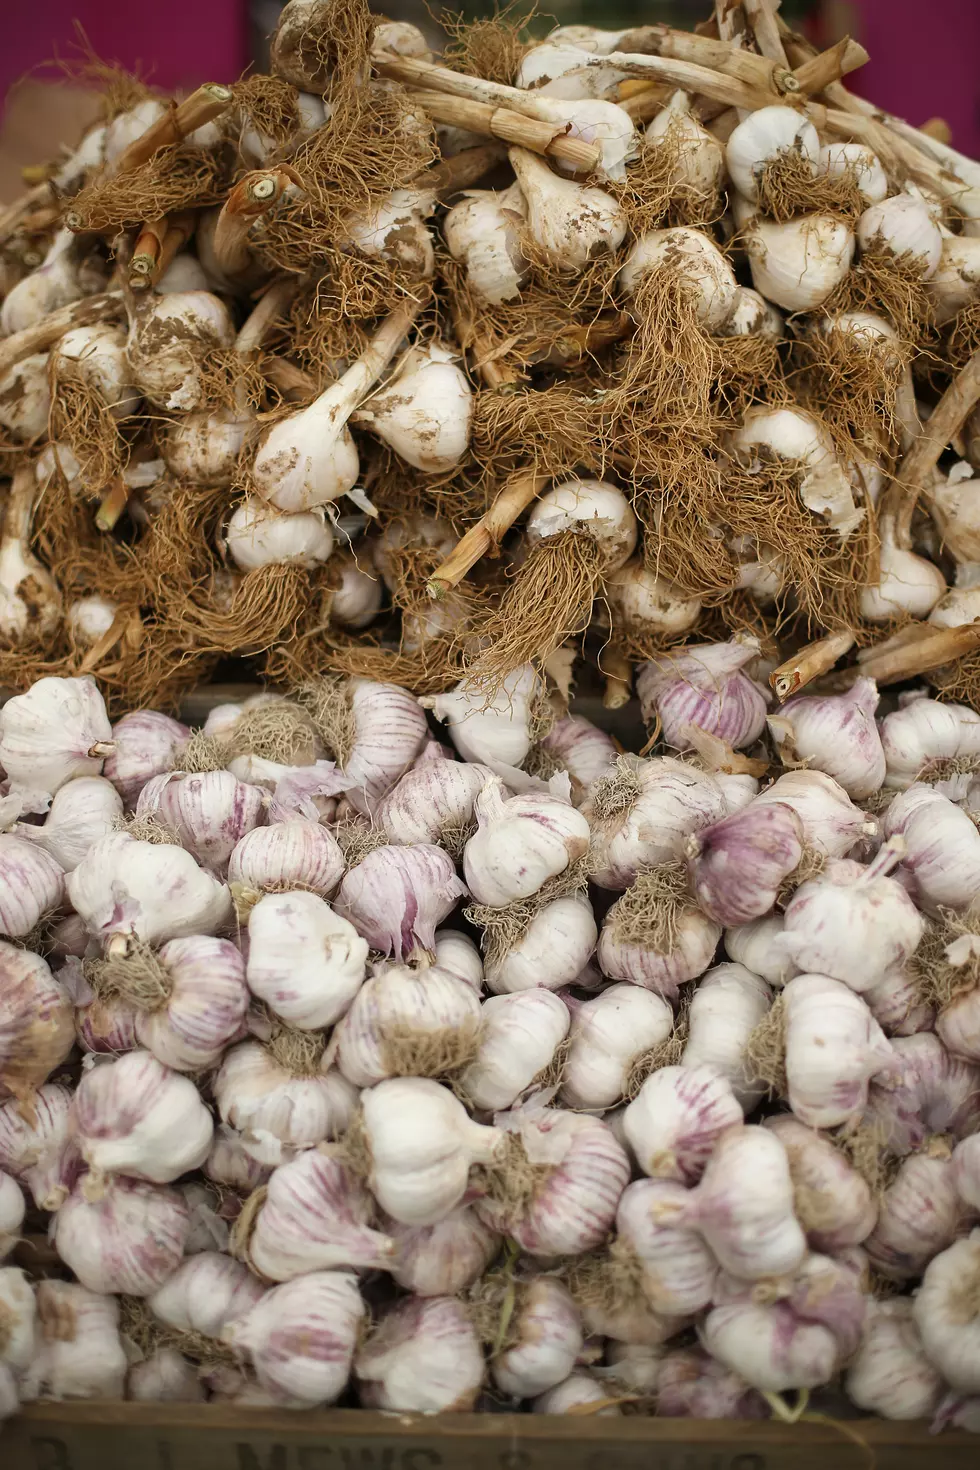 What’s That Smell? It’s National Garlic Day – April 19th! [WATCH]